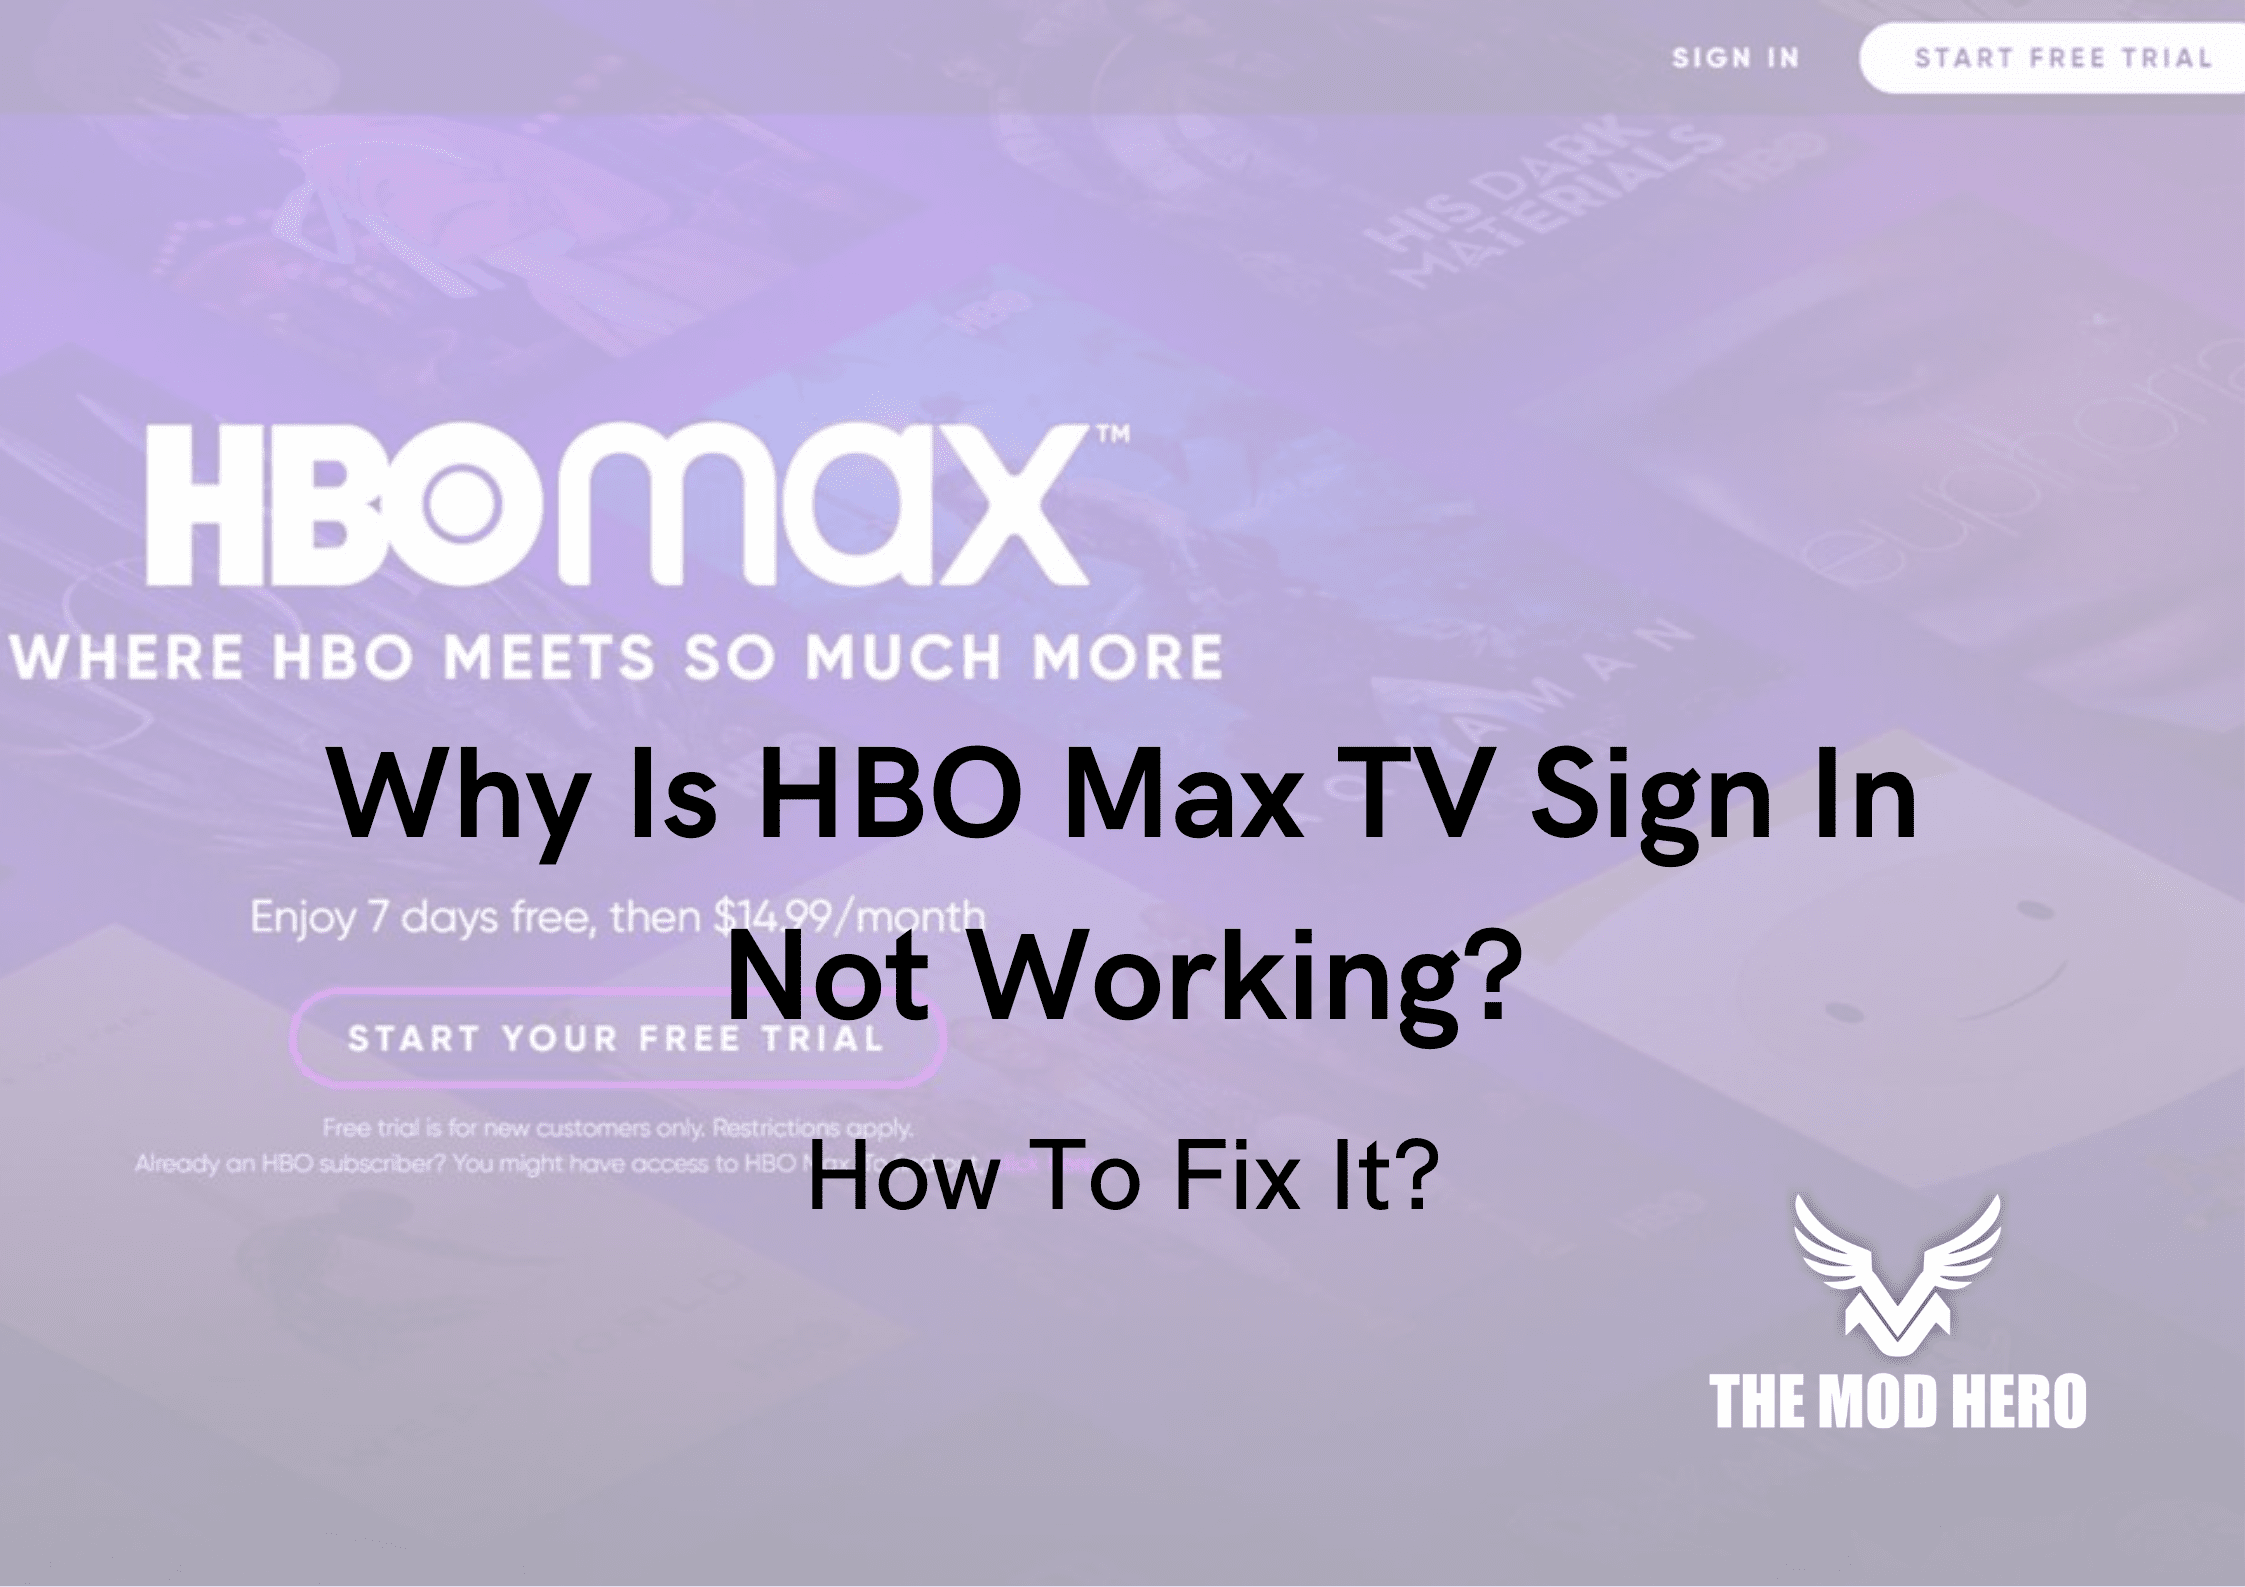 HBO Max TV Sign In Not Working